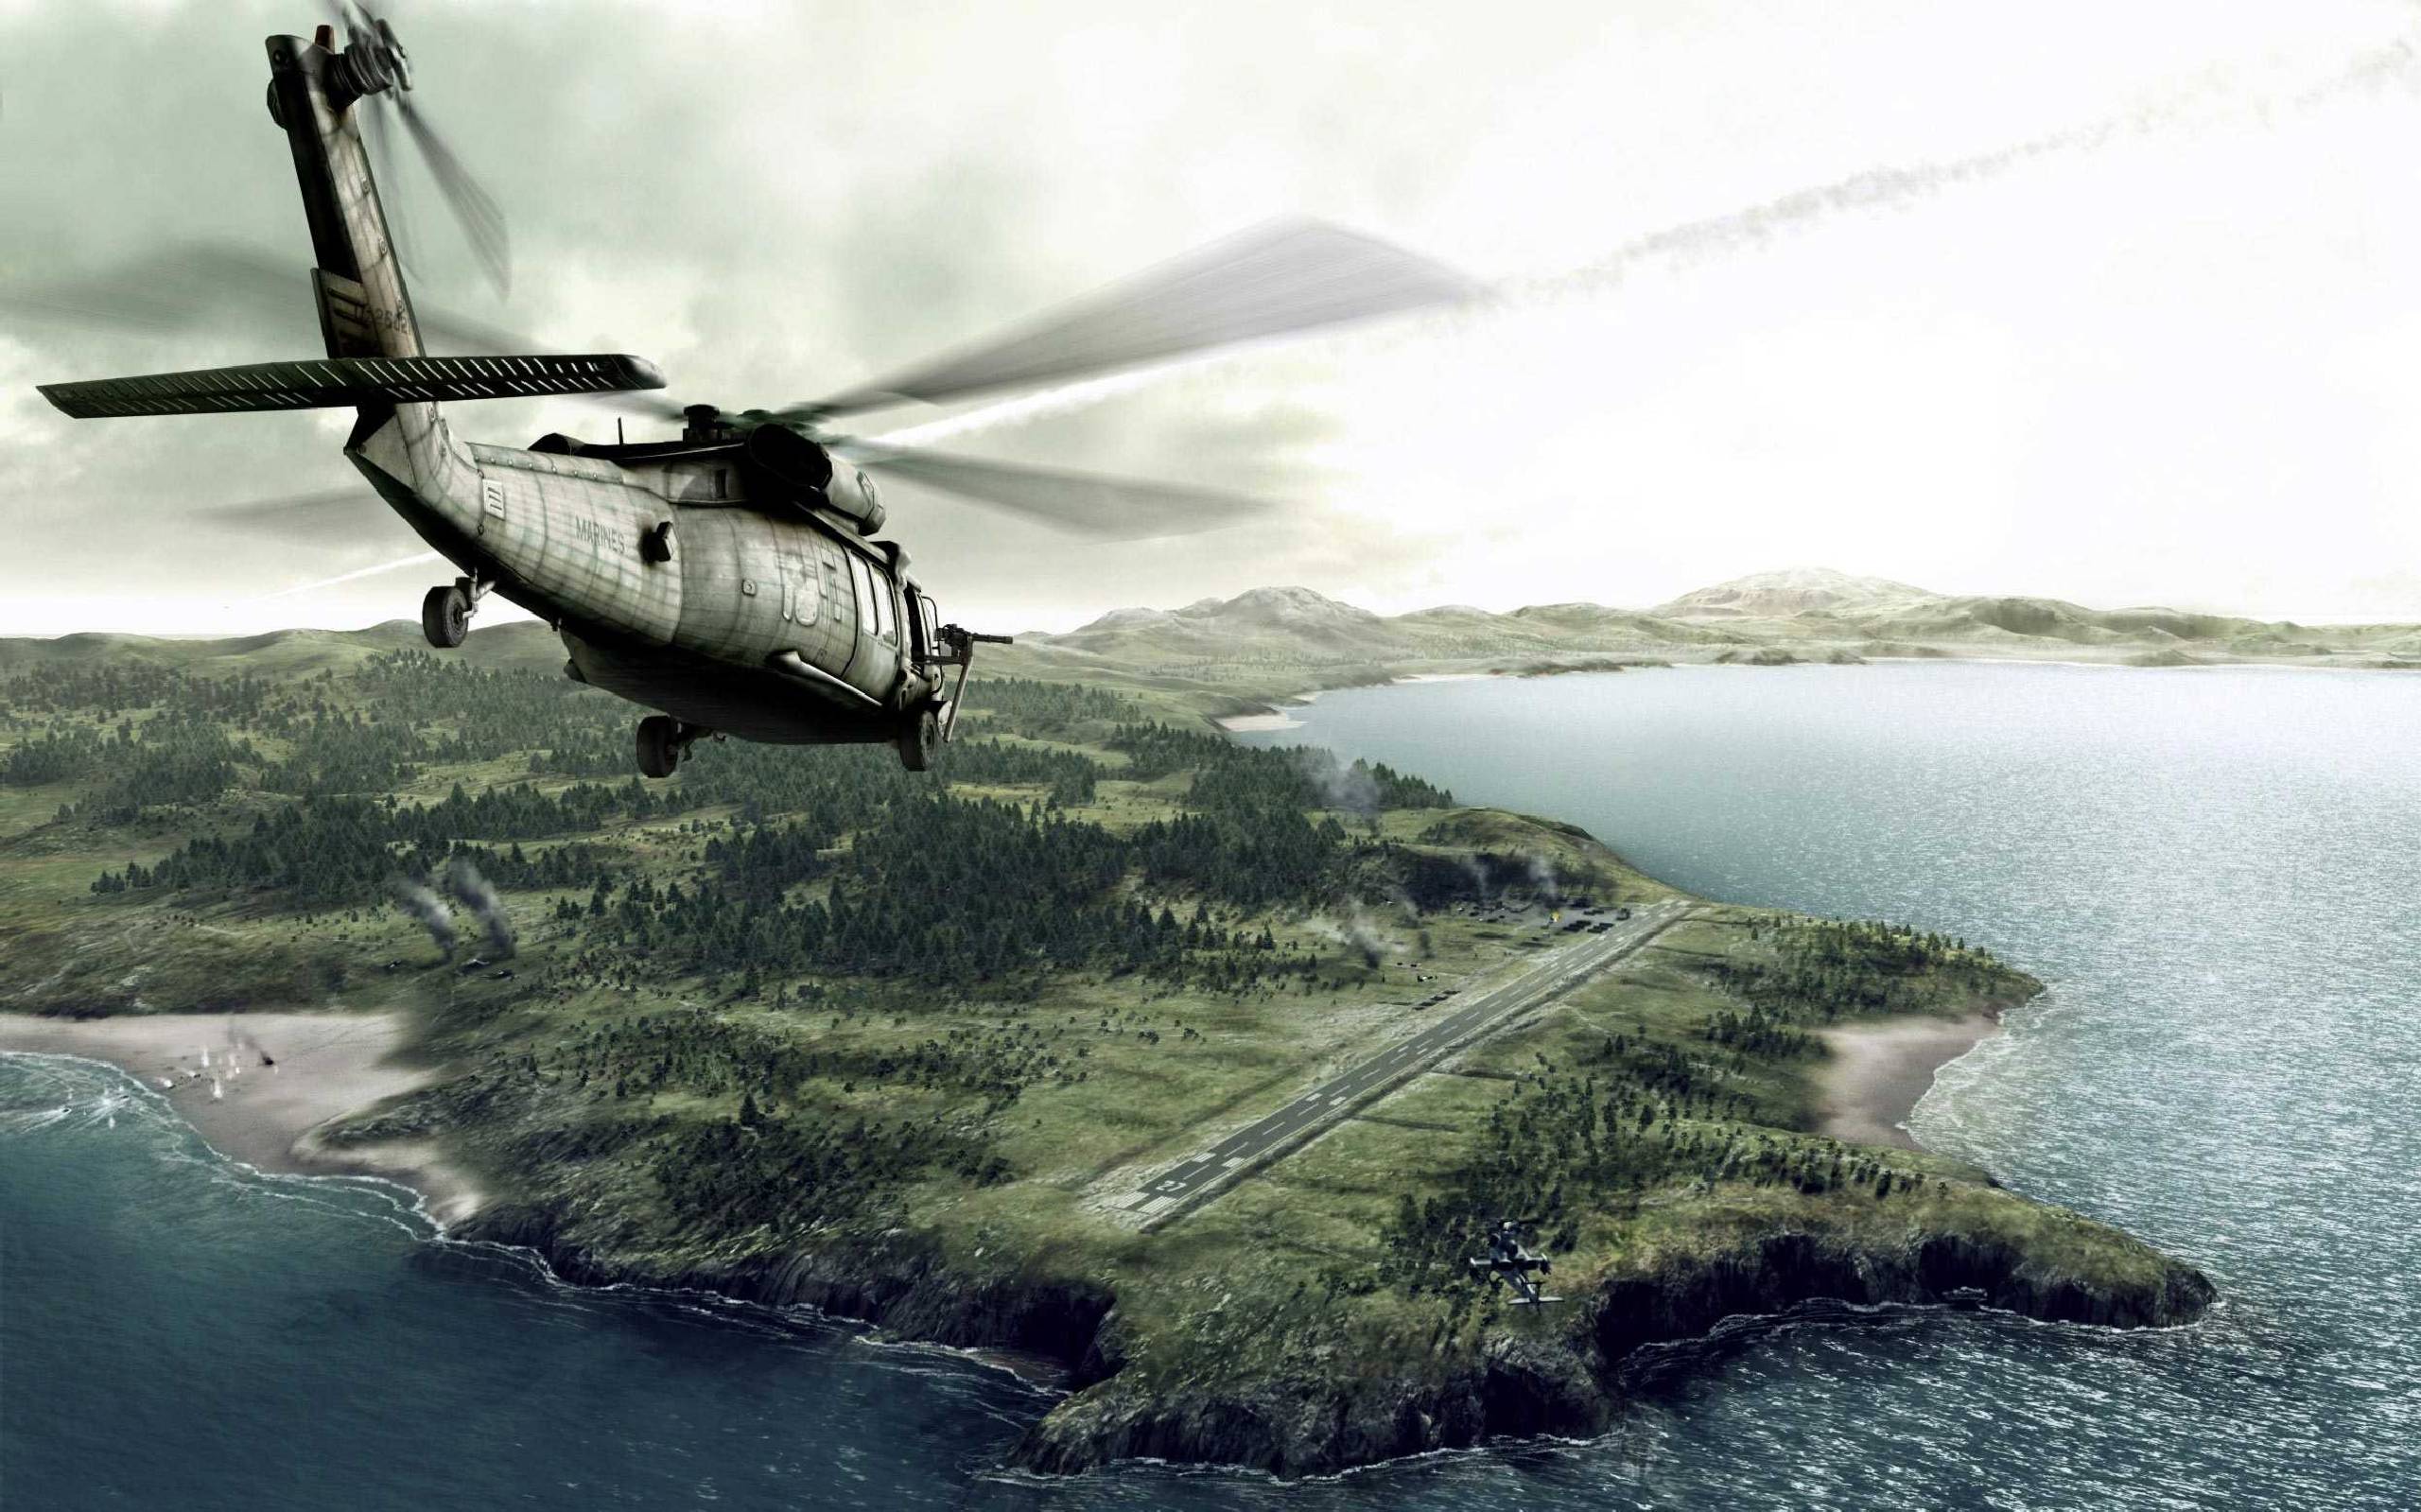 AmazingPict.com. Military Helicopters Image Collection